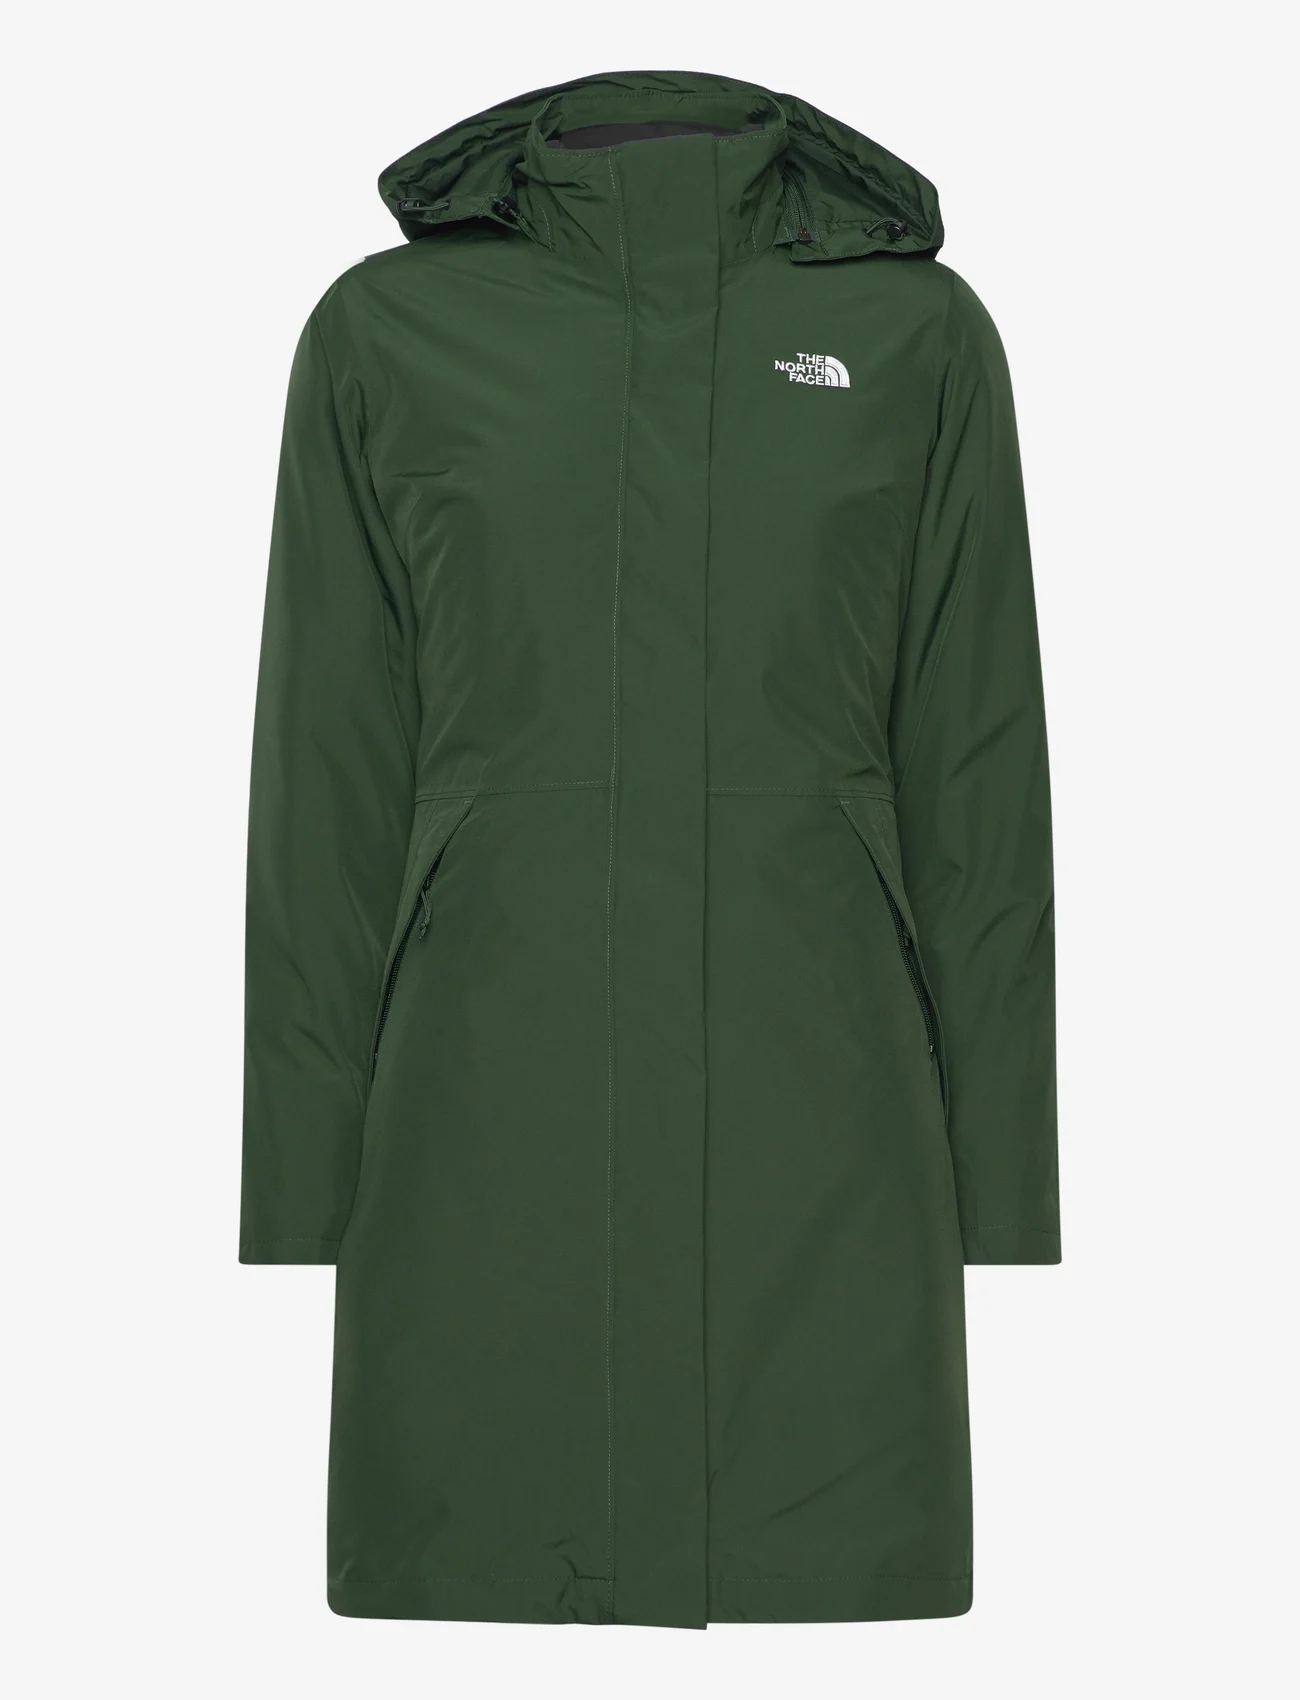 The North Face - W SUZANNE TRICLIMATE - „parka“ stiliaus paltai - pine needle/pine needle - 0